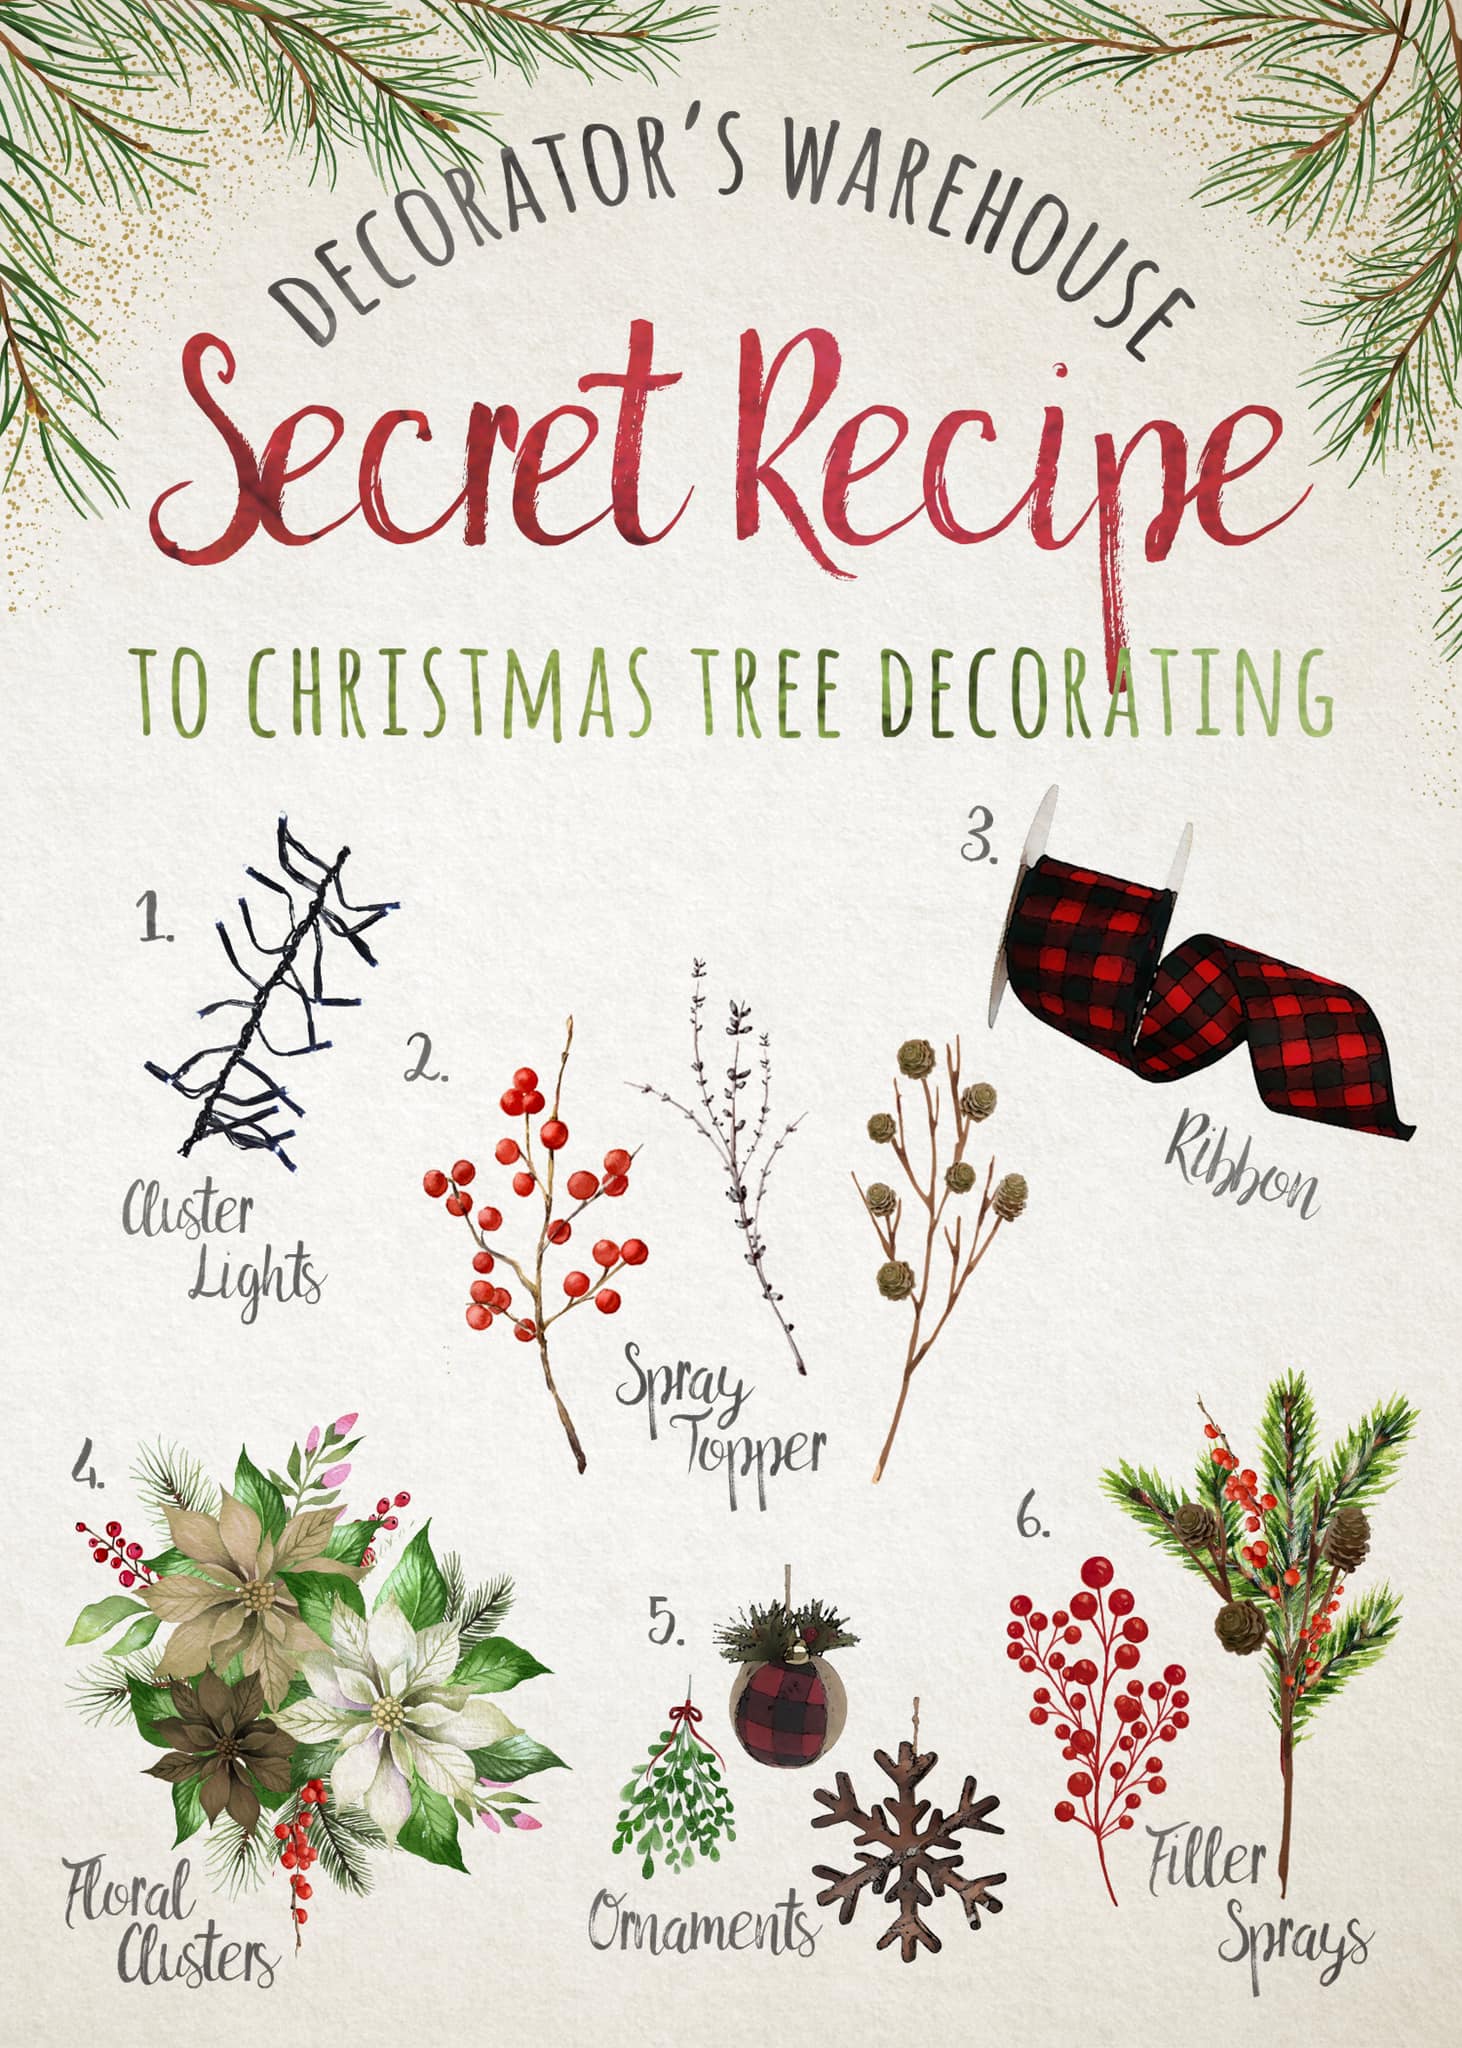 Secret recipe card with images of ribbon, spray topper, ornaments, and florals